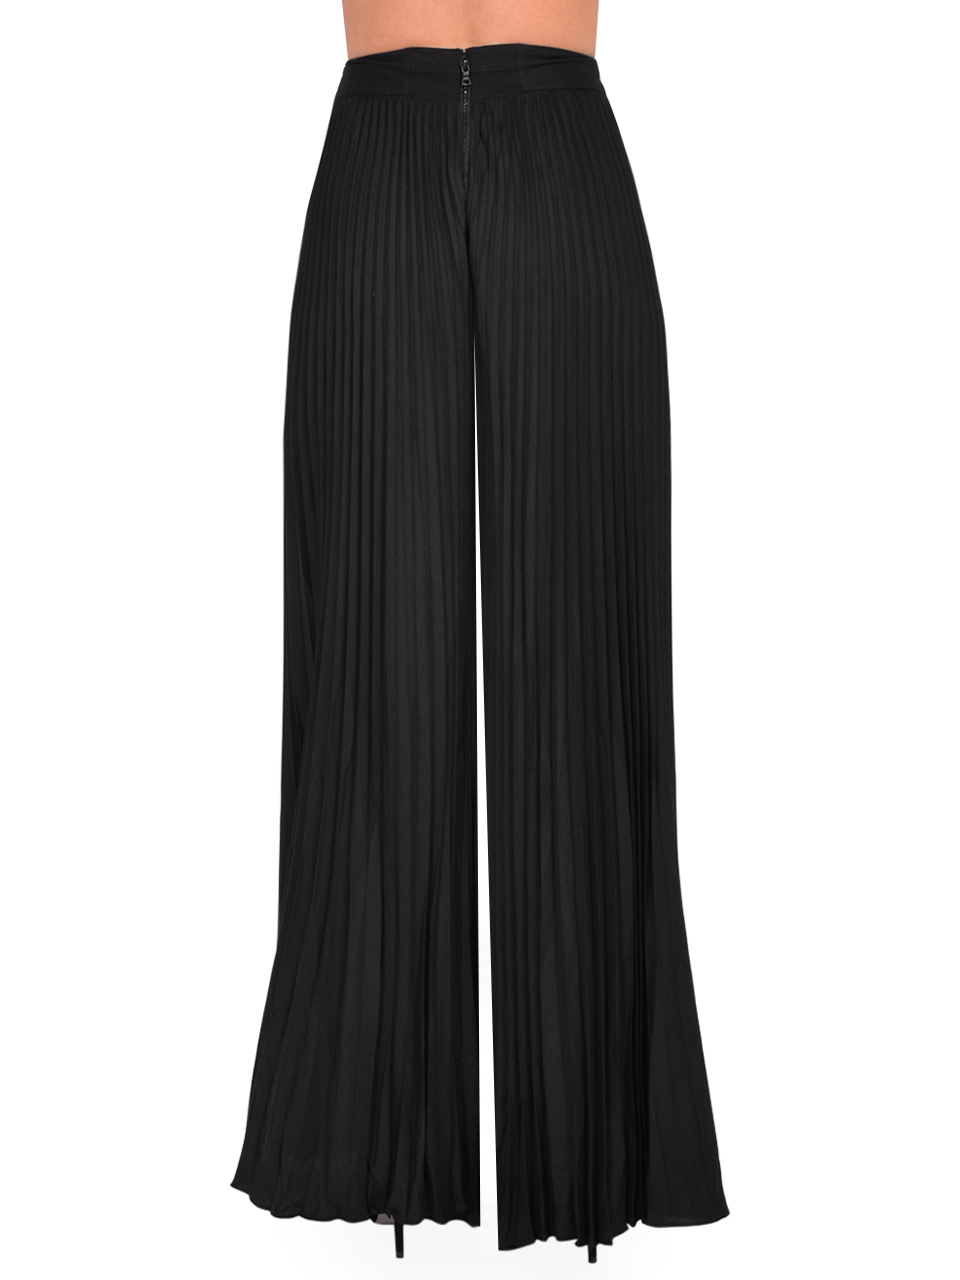 ALICE + OLIVIA Copen Pleated Pants in Black Back View 